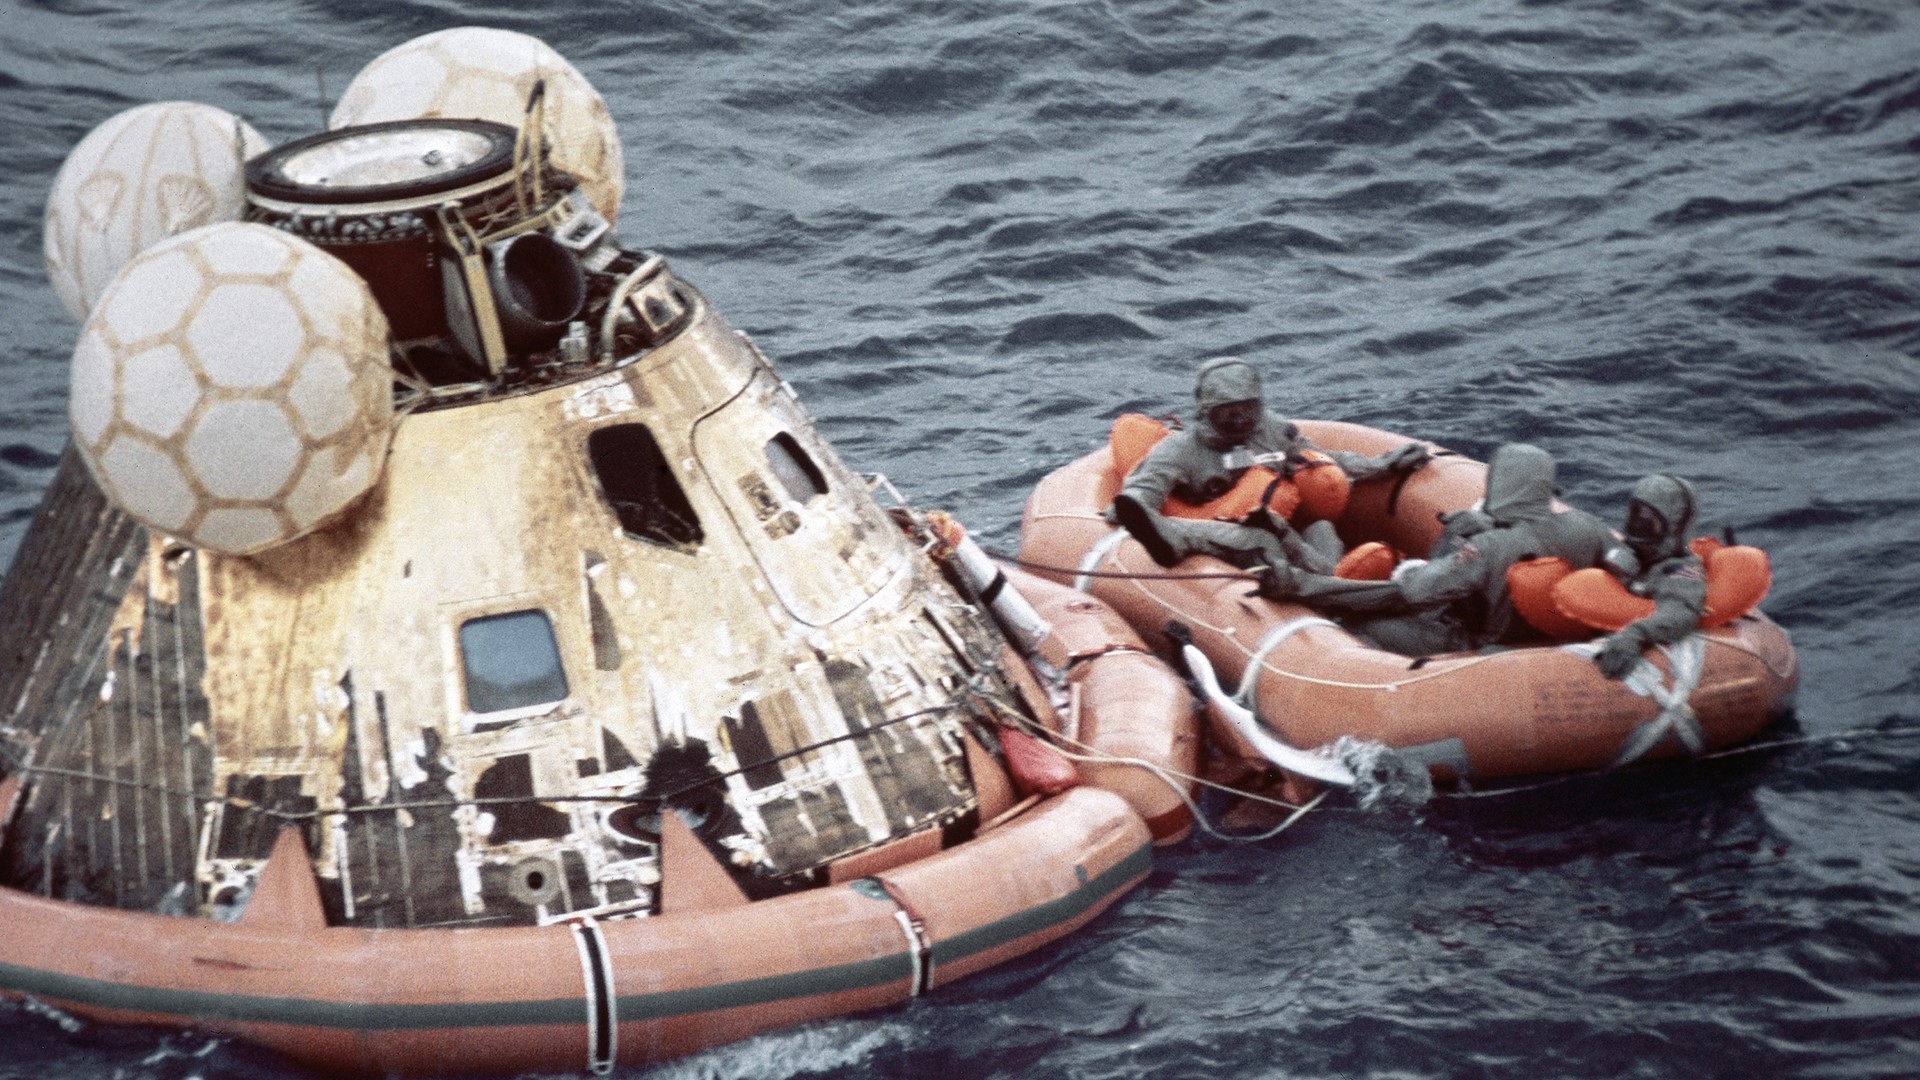 how long was apollo 11 trip to the moon